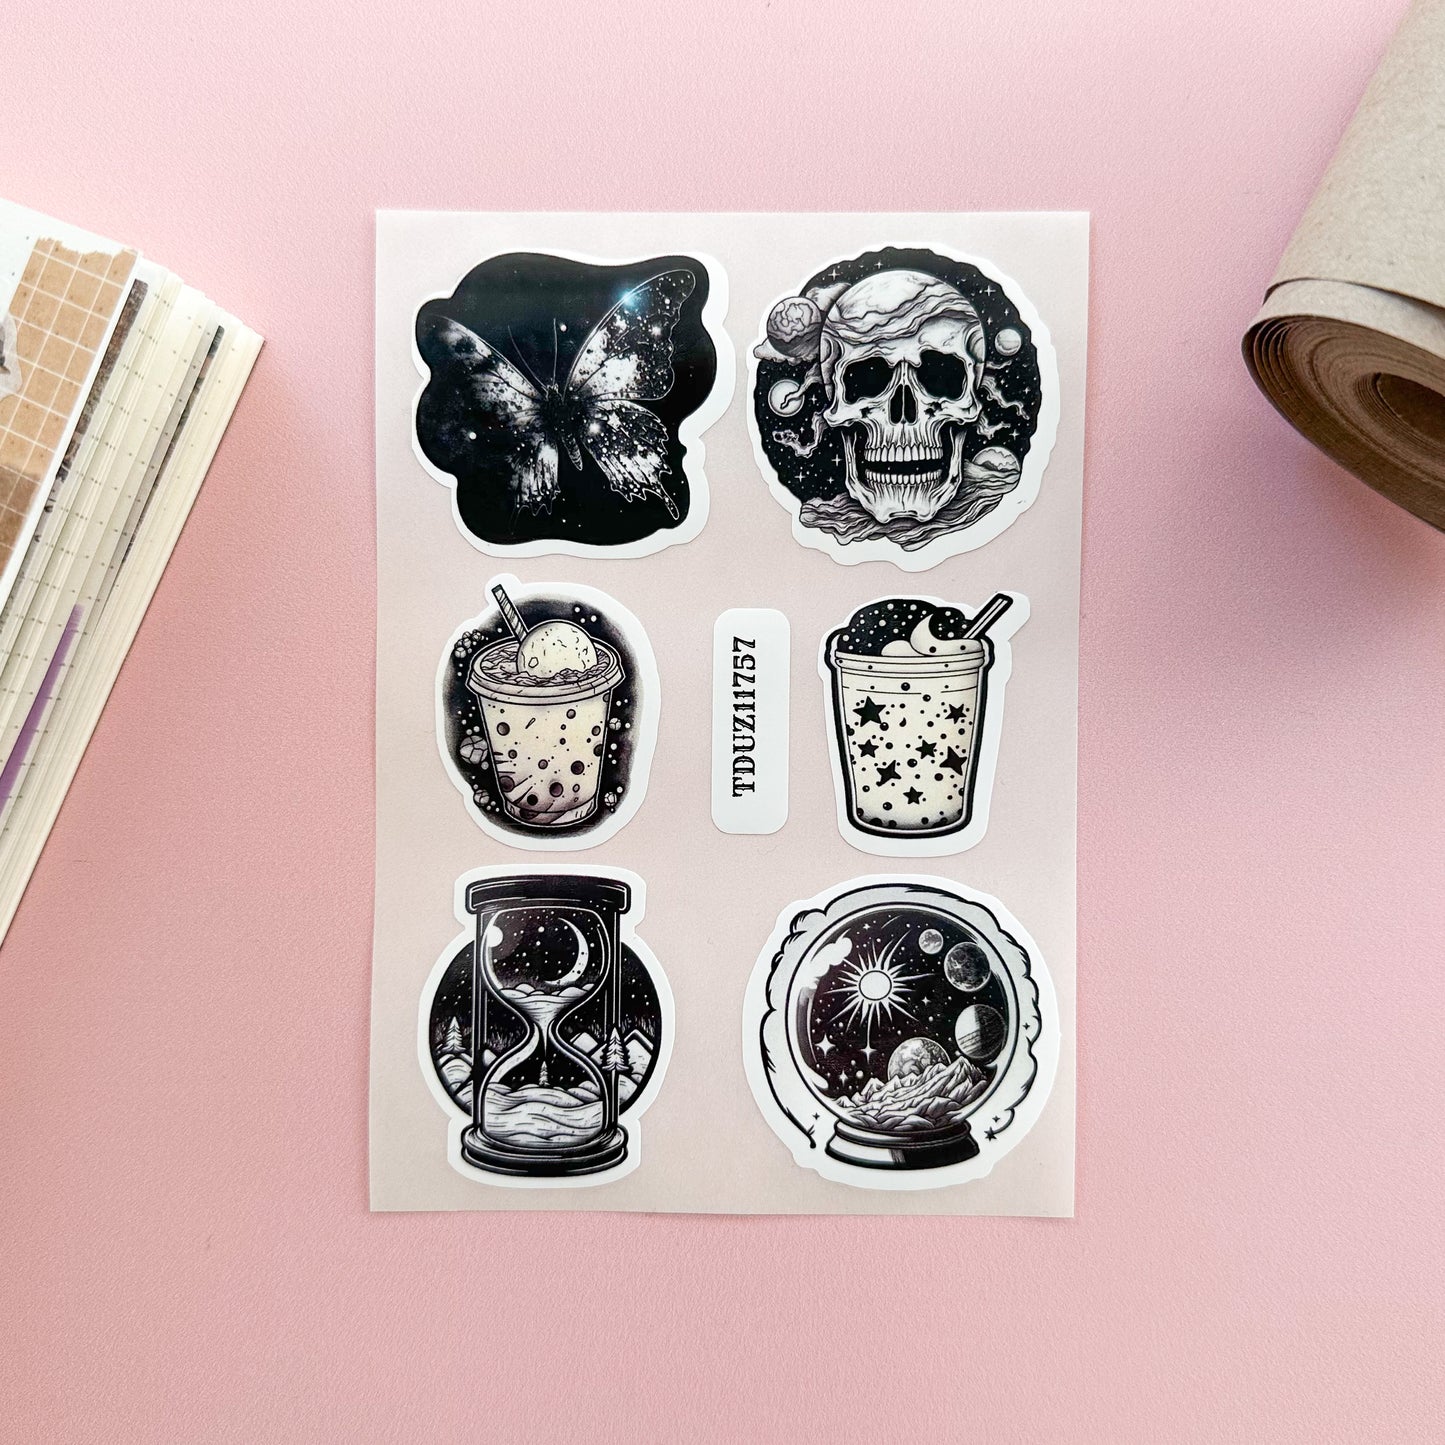 celestial oddities sticker sheet vinyl with black and white illustrations